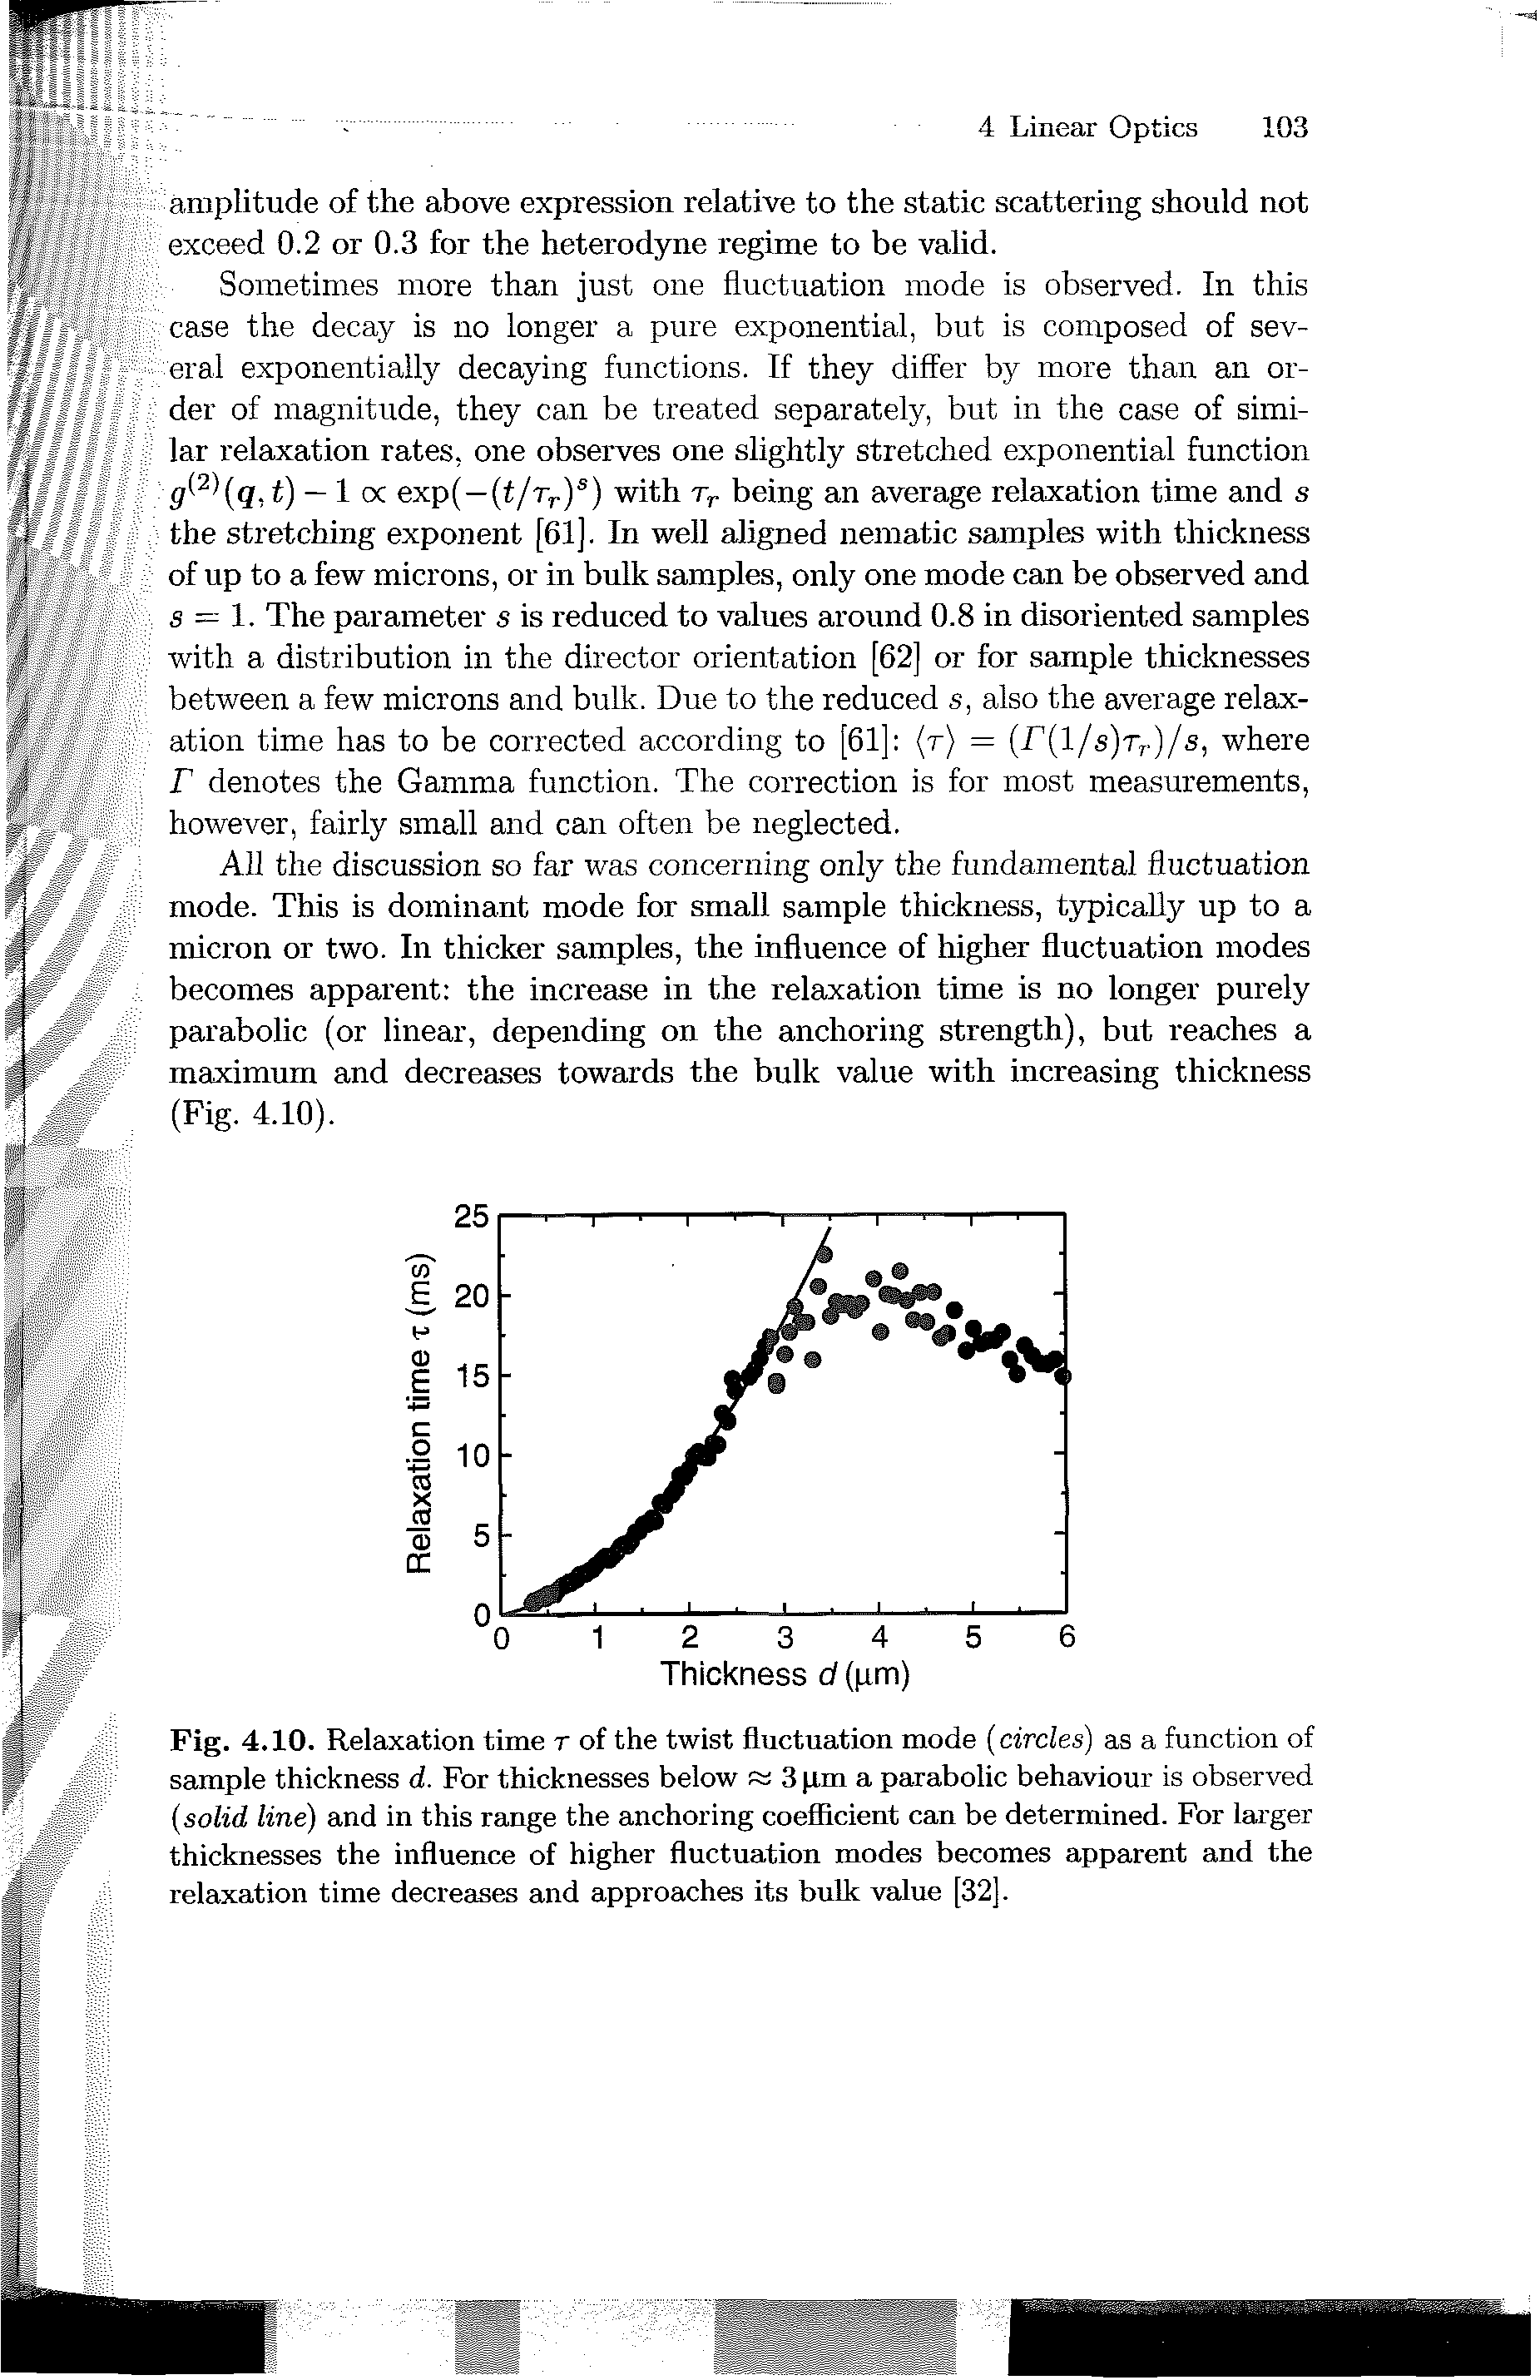 Fig. 4.10. Relaxation time t of the twist fluctuation mode circles) as a function of sample thickness d. For thicknesses below 3 (im a parabolic behaviour is observed solid line) and in this range the anchoring coefficient can be determined. For larger thicknesses the influence of higher fluctuation modes becomes apparent and the relaxation time decreases and approaches its bulk value [32].